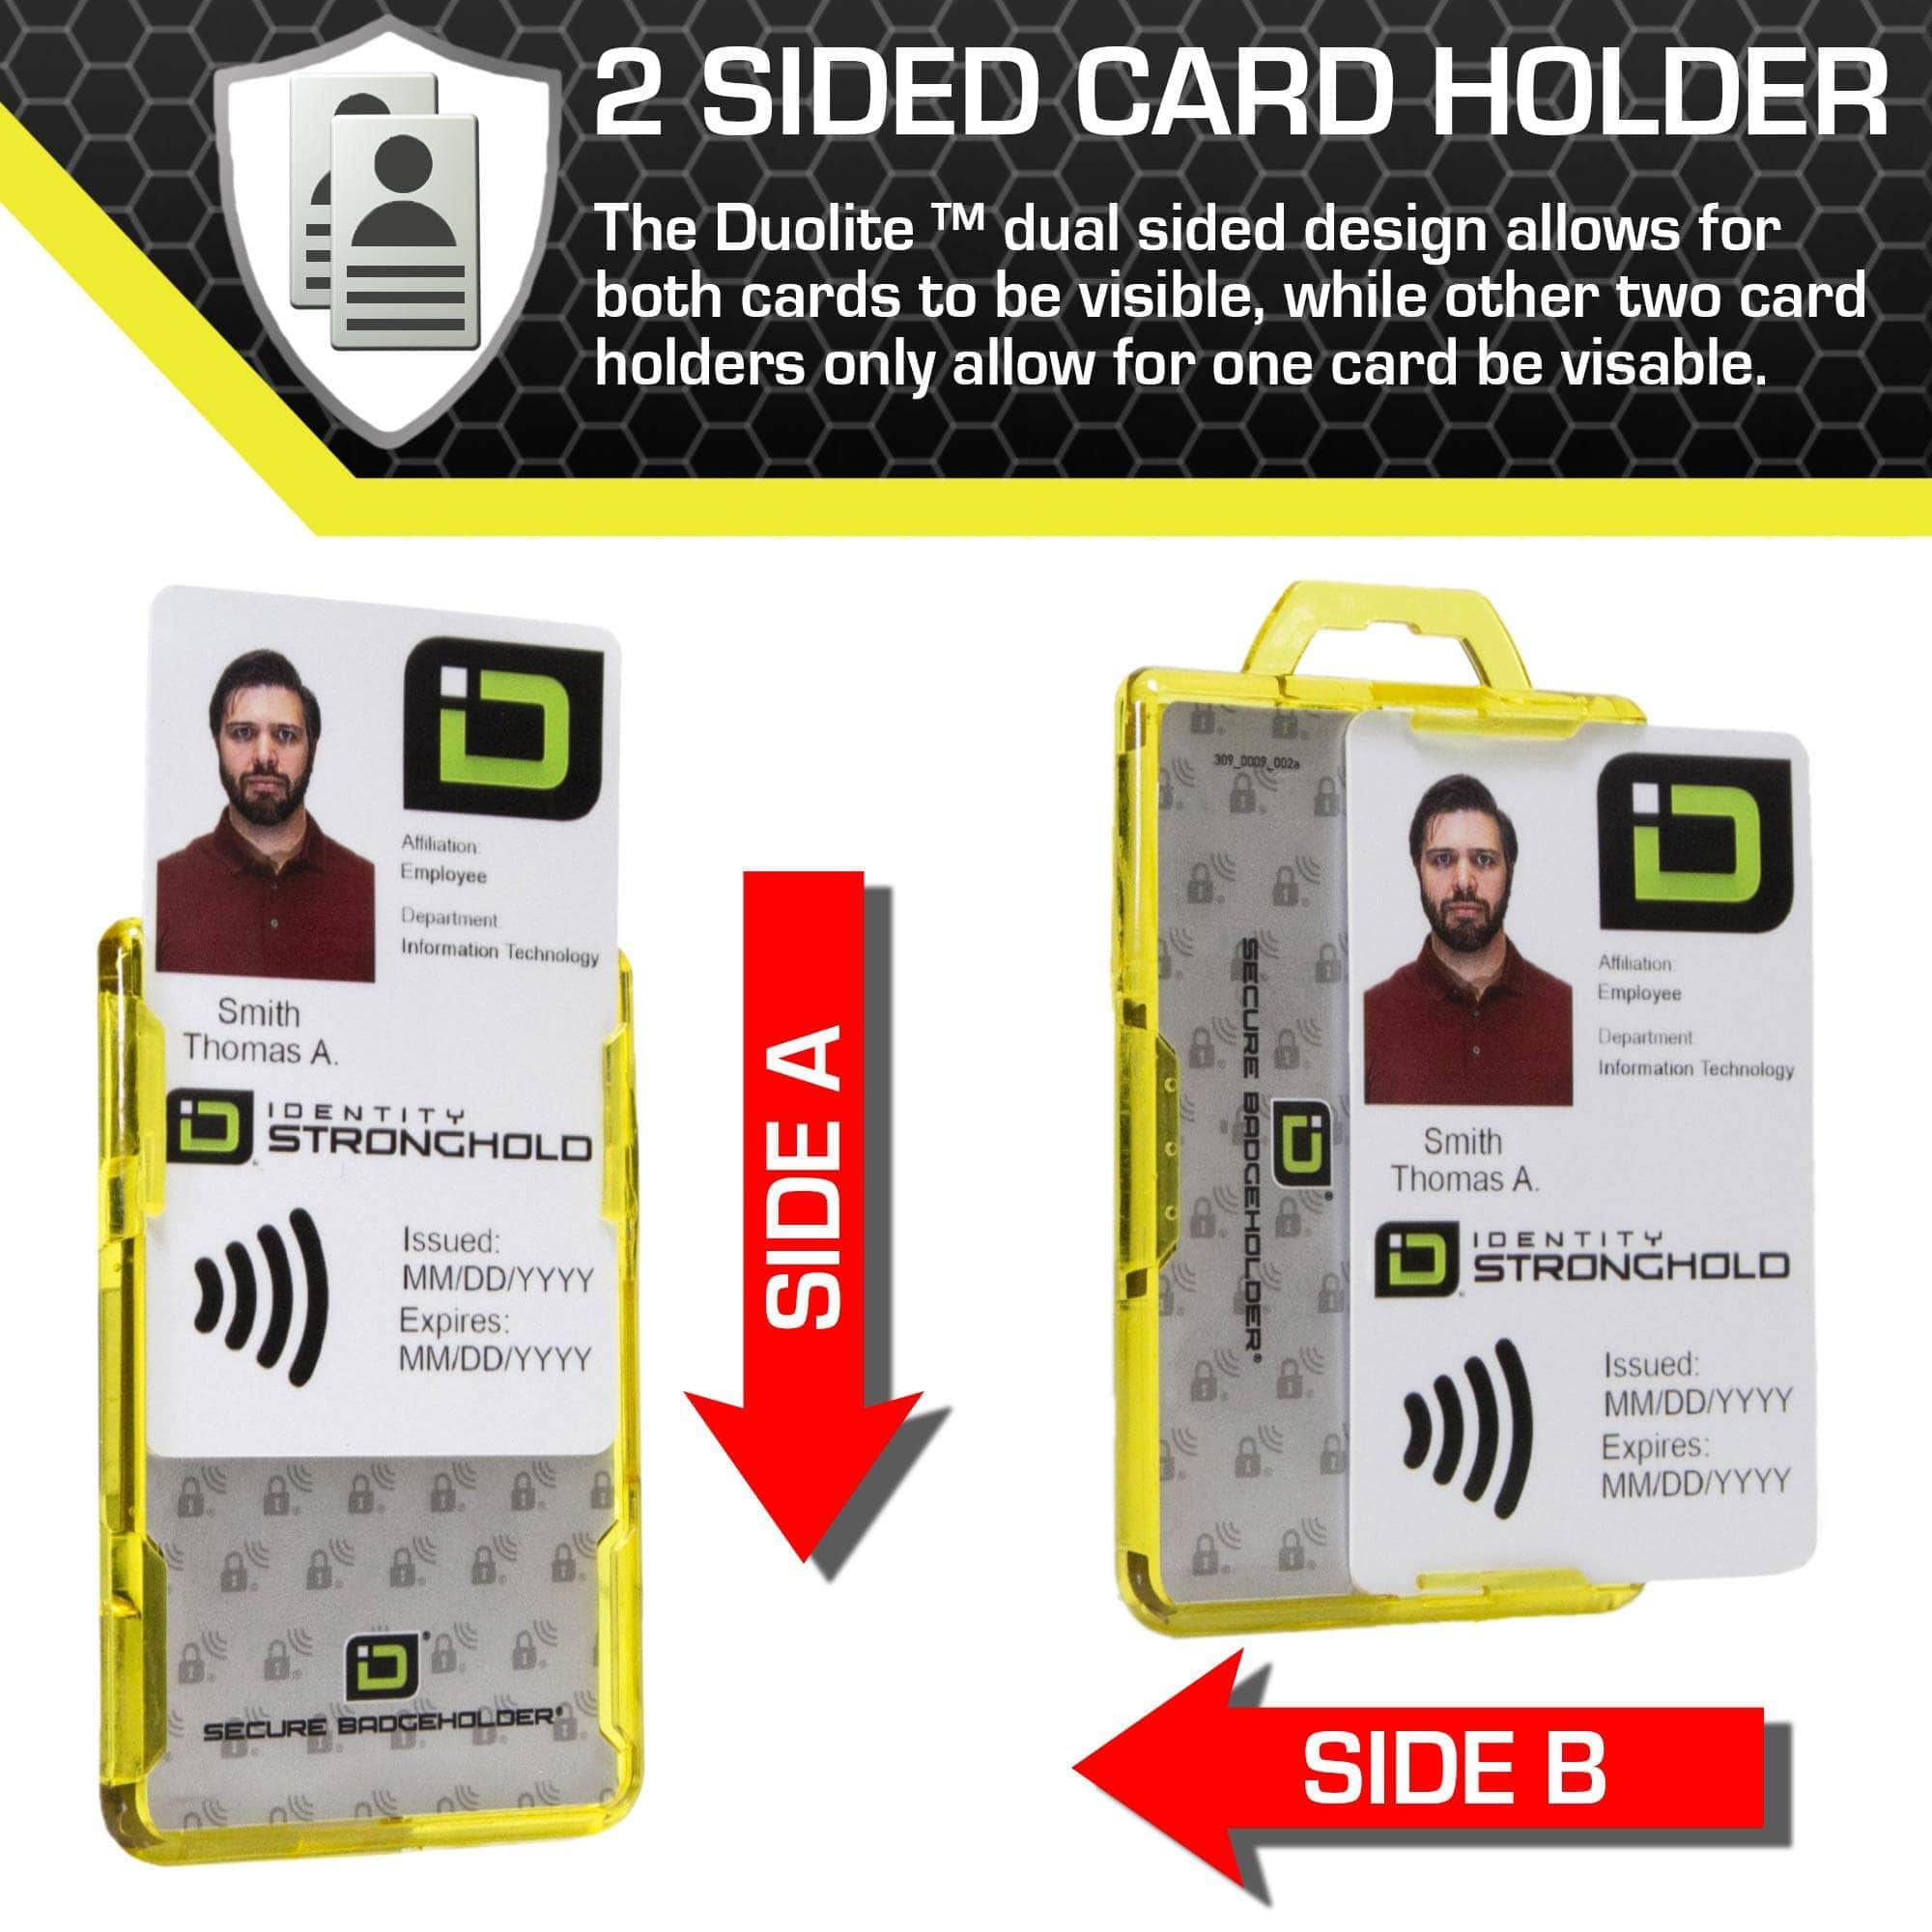 IDSH2004-001B-ID-Stronghold-Yellow-DuoLite-Vertical-2-Card-Holder-instruction